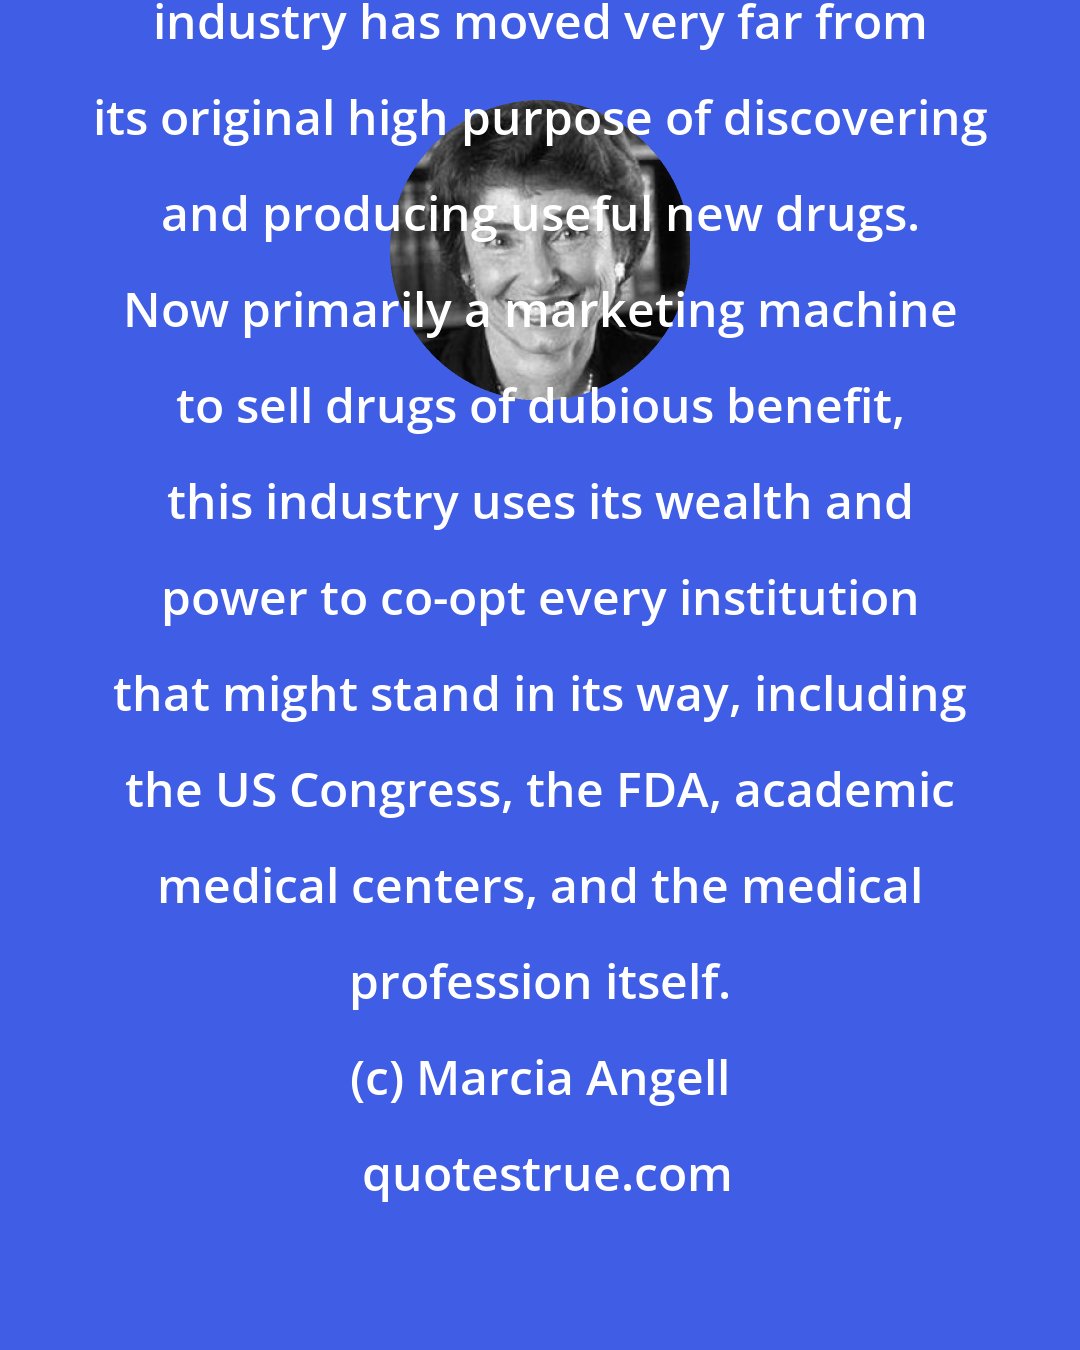 Marcia Angell: Over the past two decades the pharmaceutical industry has moved very far from its original high purpose of discovering and producing useful new drugs. Now primarily a marketing machine to sell drugs of dubious benefit, this industry uses its wealth and power to co-opt every institution that might stand in its way, including the US Congress, the FDA, academic medical centers, and the medical profession itself.